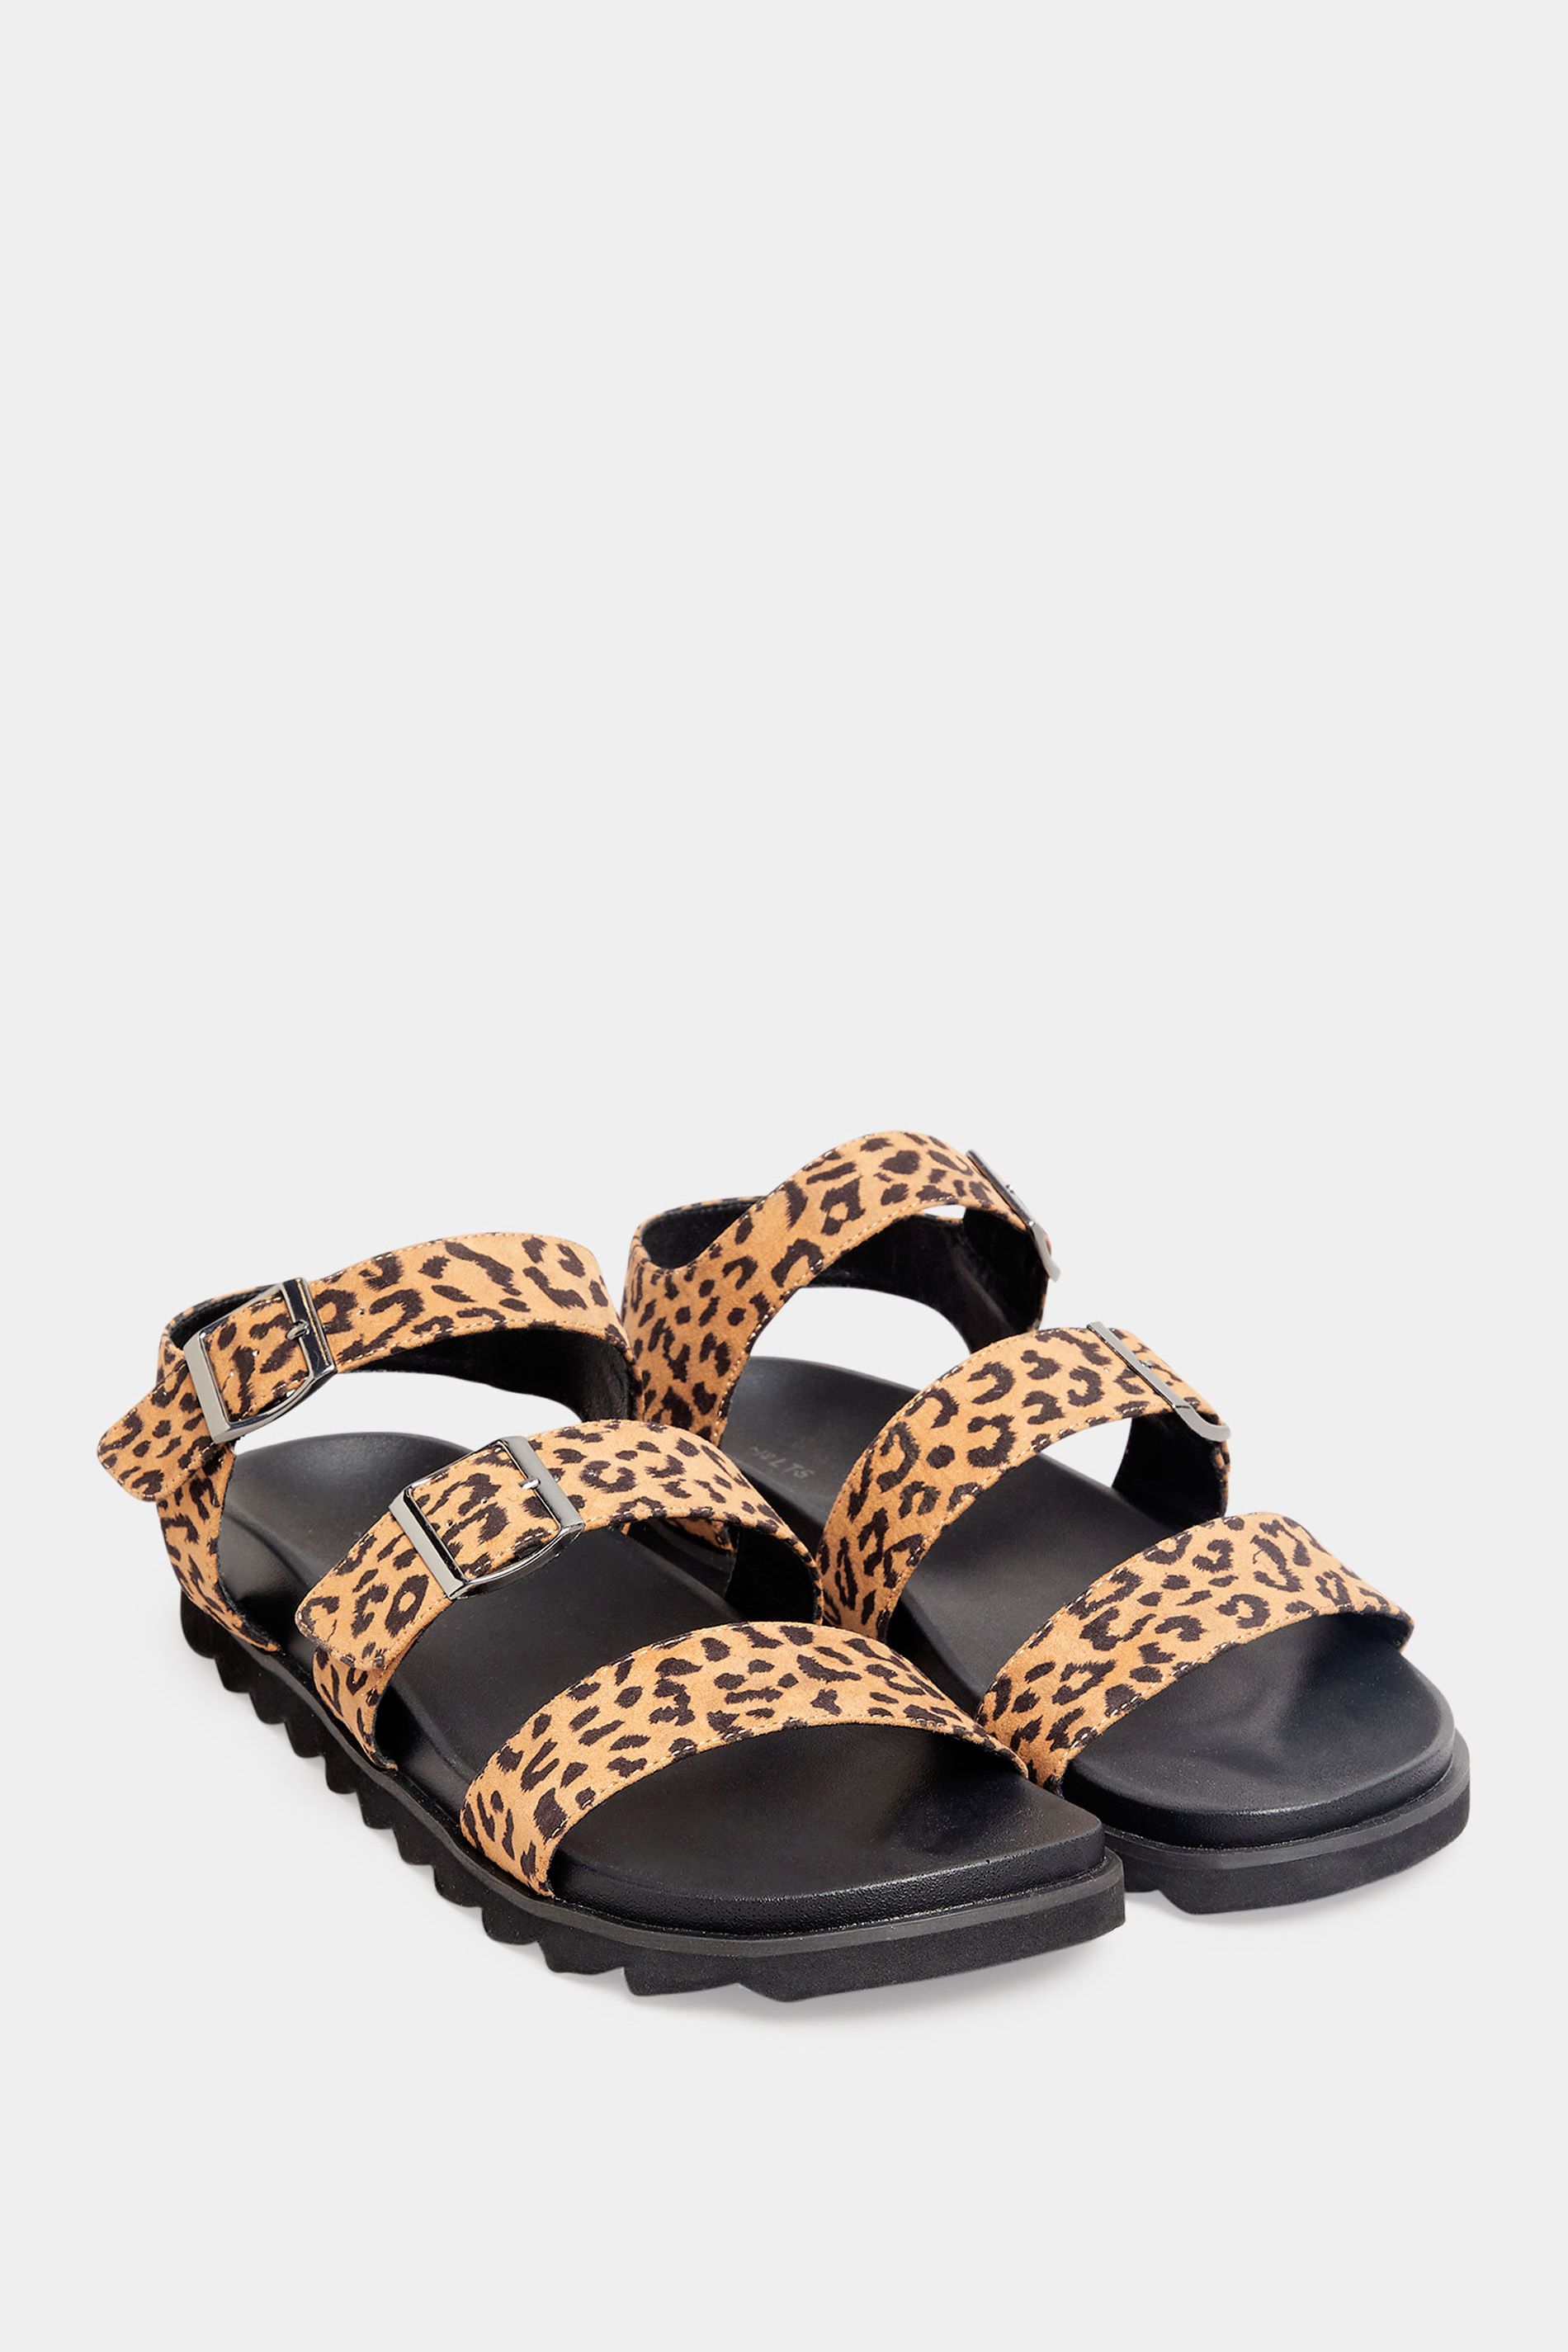 LTS Brown Leopard Print Buckle Strap Sandals In Wide E Fit | Long Tall Sally 2